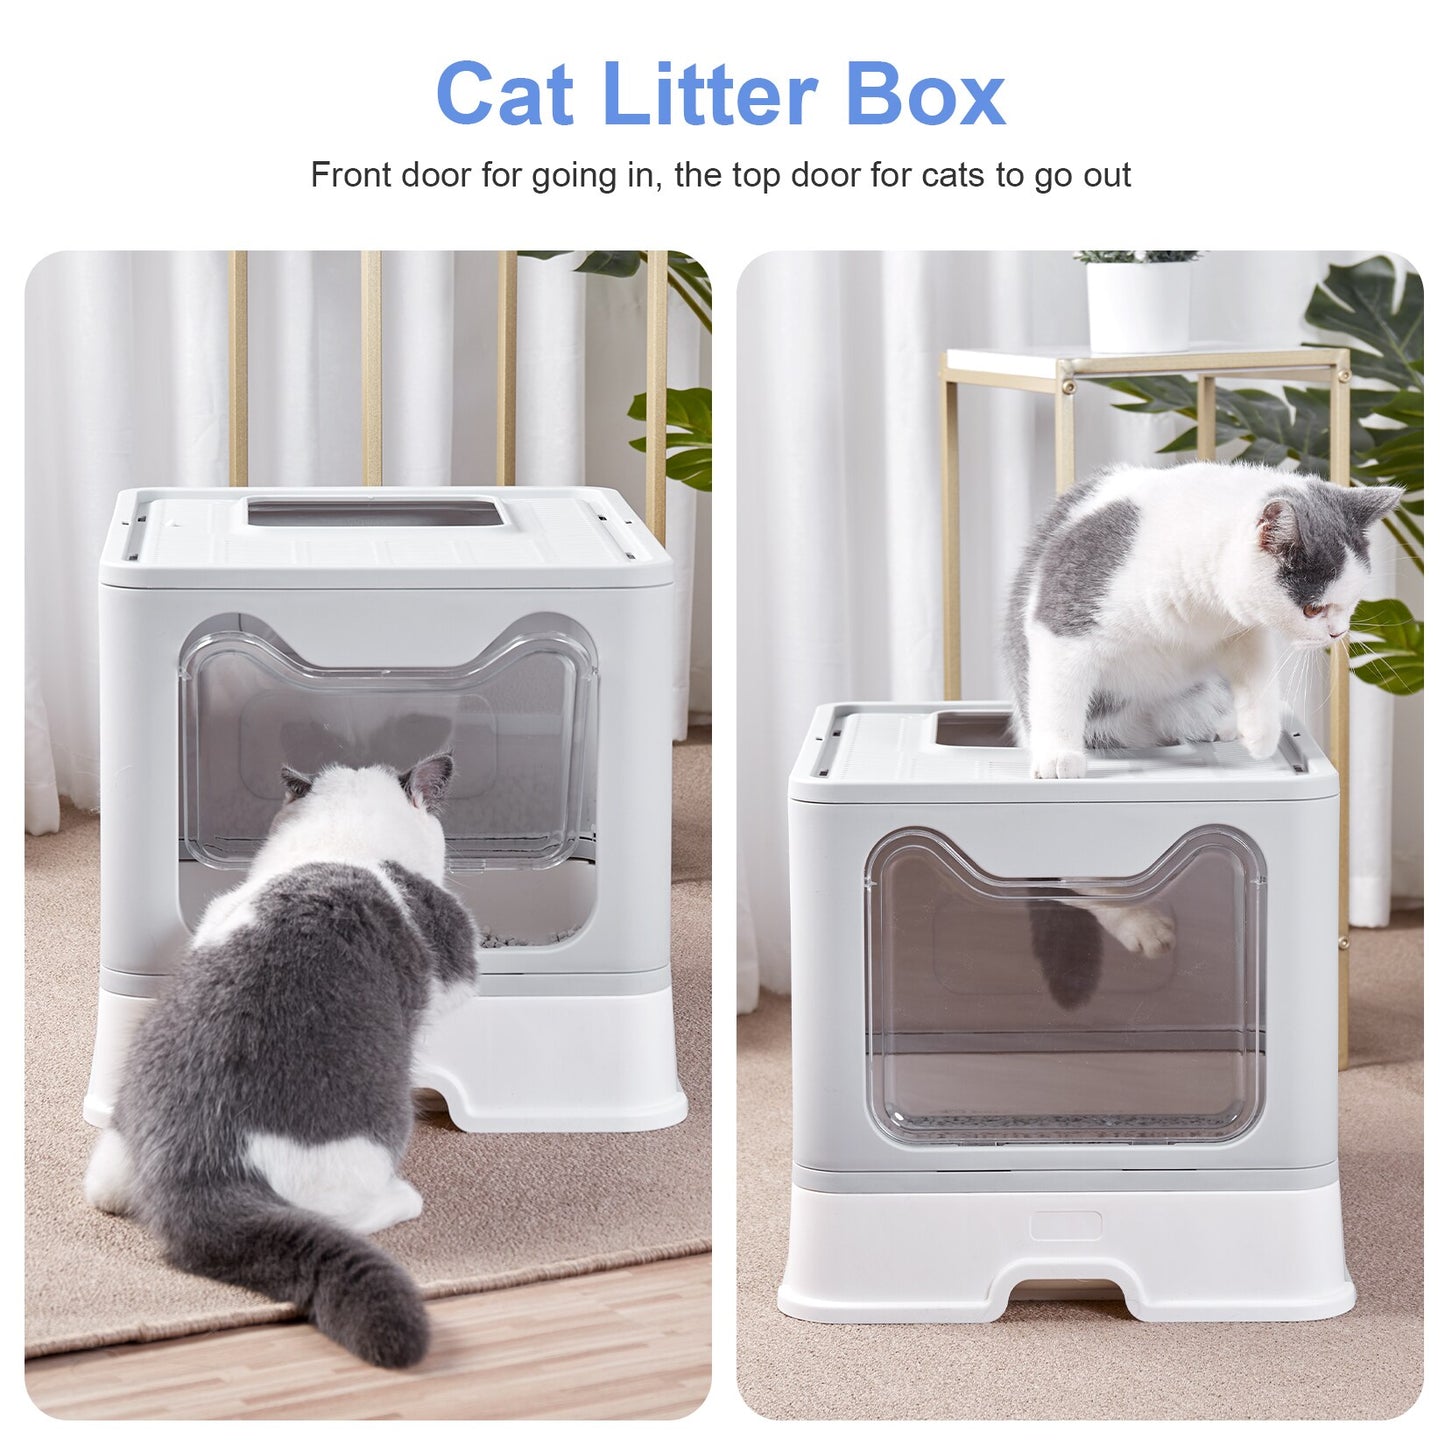 Binygo Front Entry Top Exit Cat Litter Box with Lid Foldable Large Kitty Litter Boxes Cats Toilet Including Plastic Scoop